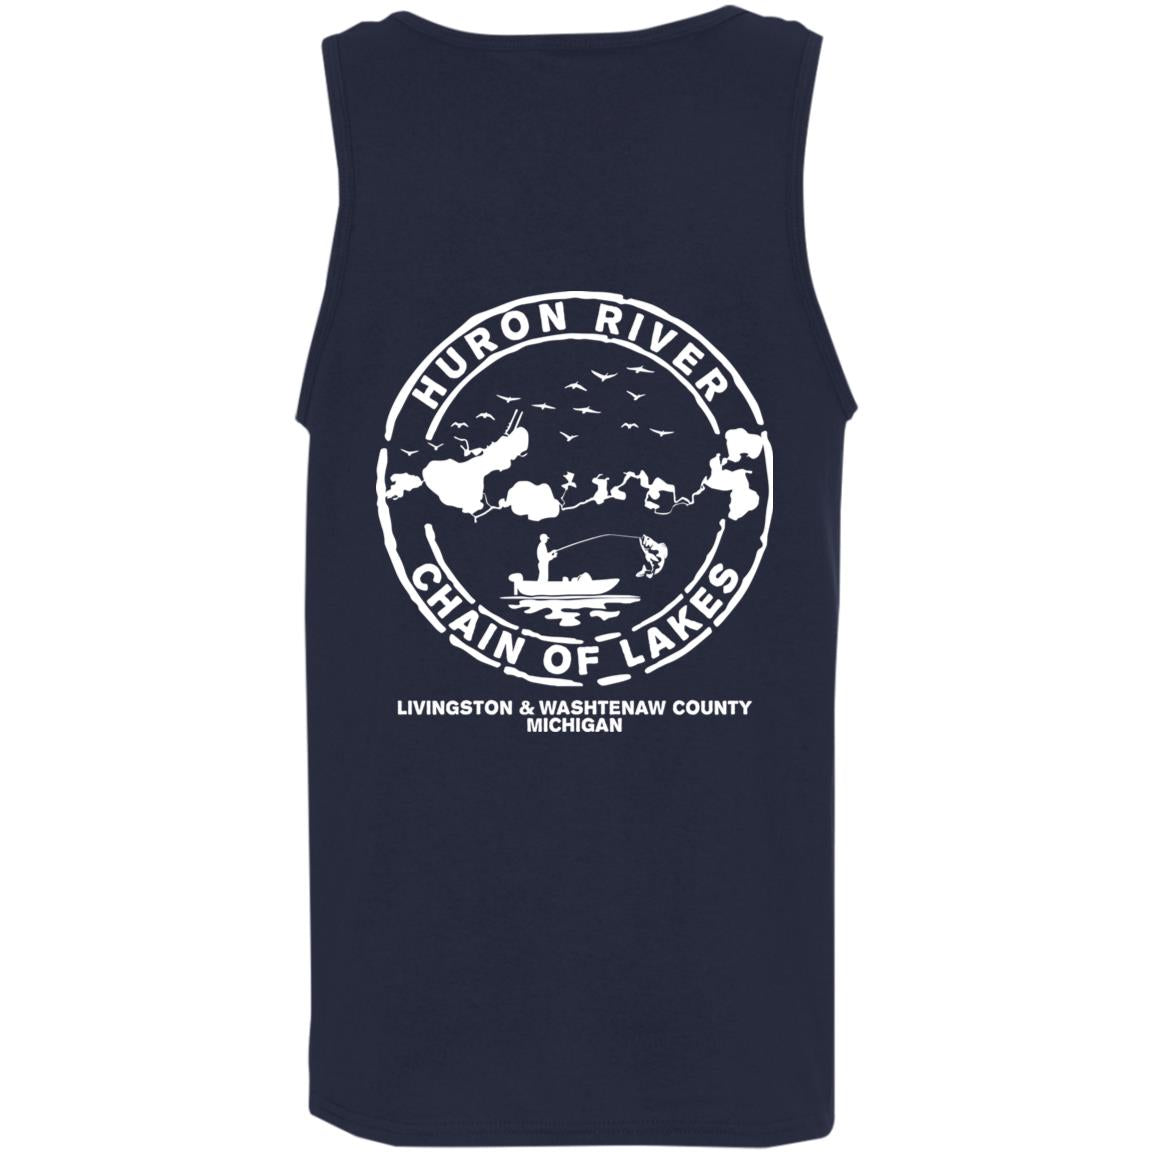 ***2 SIDED***  HRCL FL - Rock Out with your Prop Out - 2 Sided G520 Cotton Tank Top 5.3 oz.